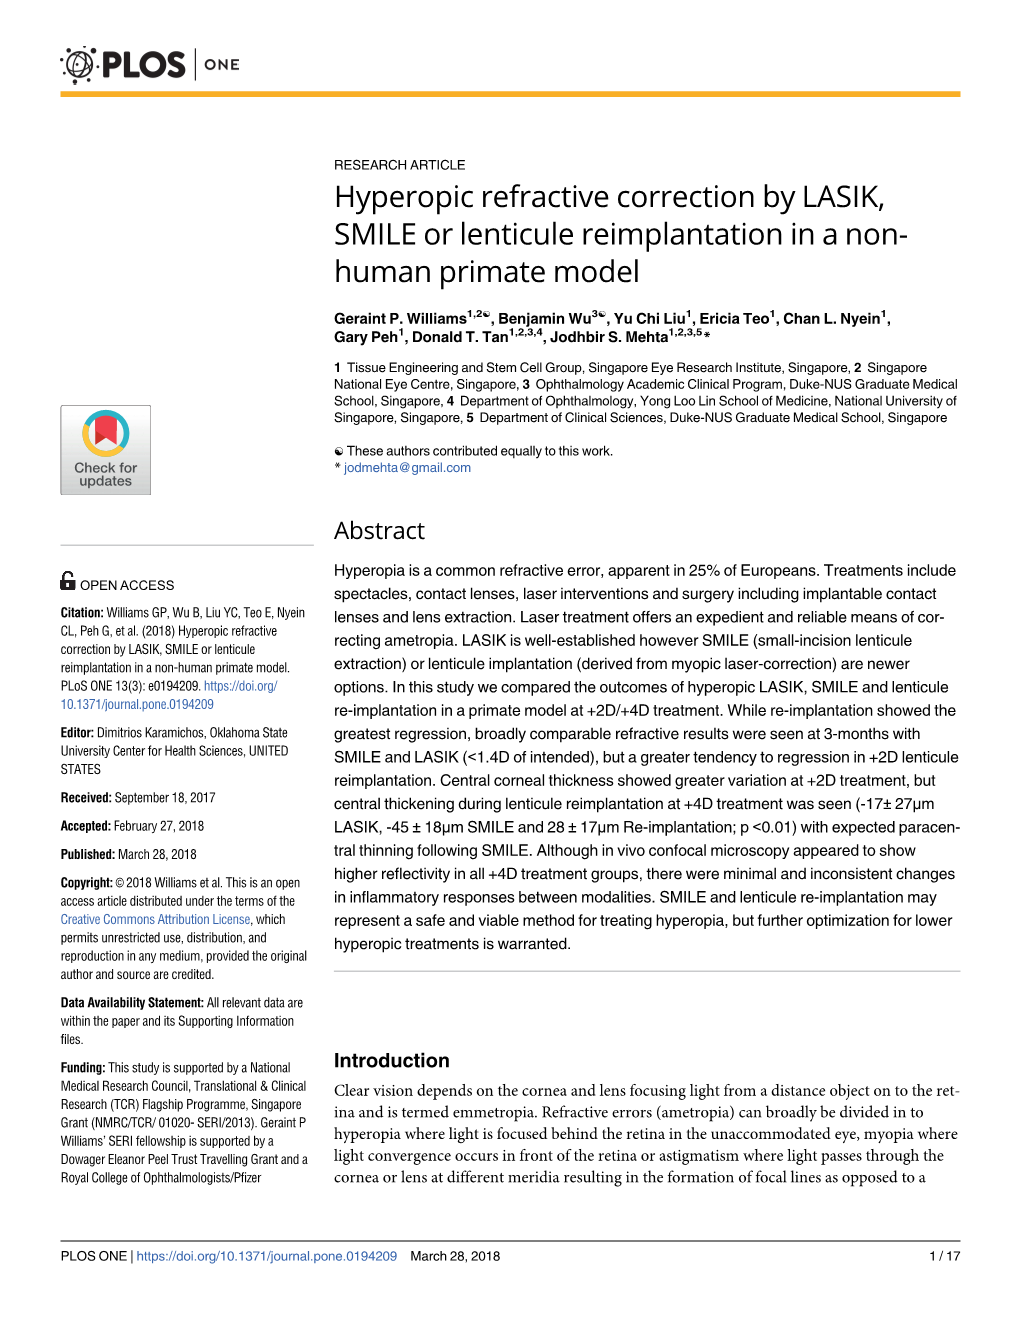 Hyperopic Refractive Correction by LASIK, SMILE Or Lenticule Reimplantation in a Non- Human Primate Model